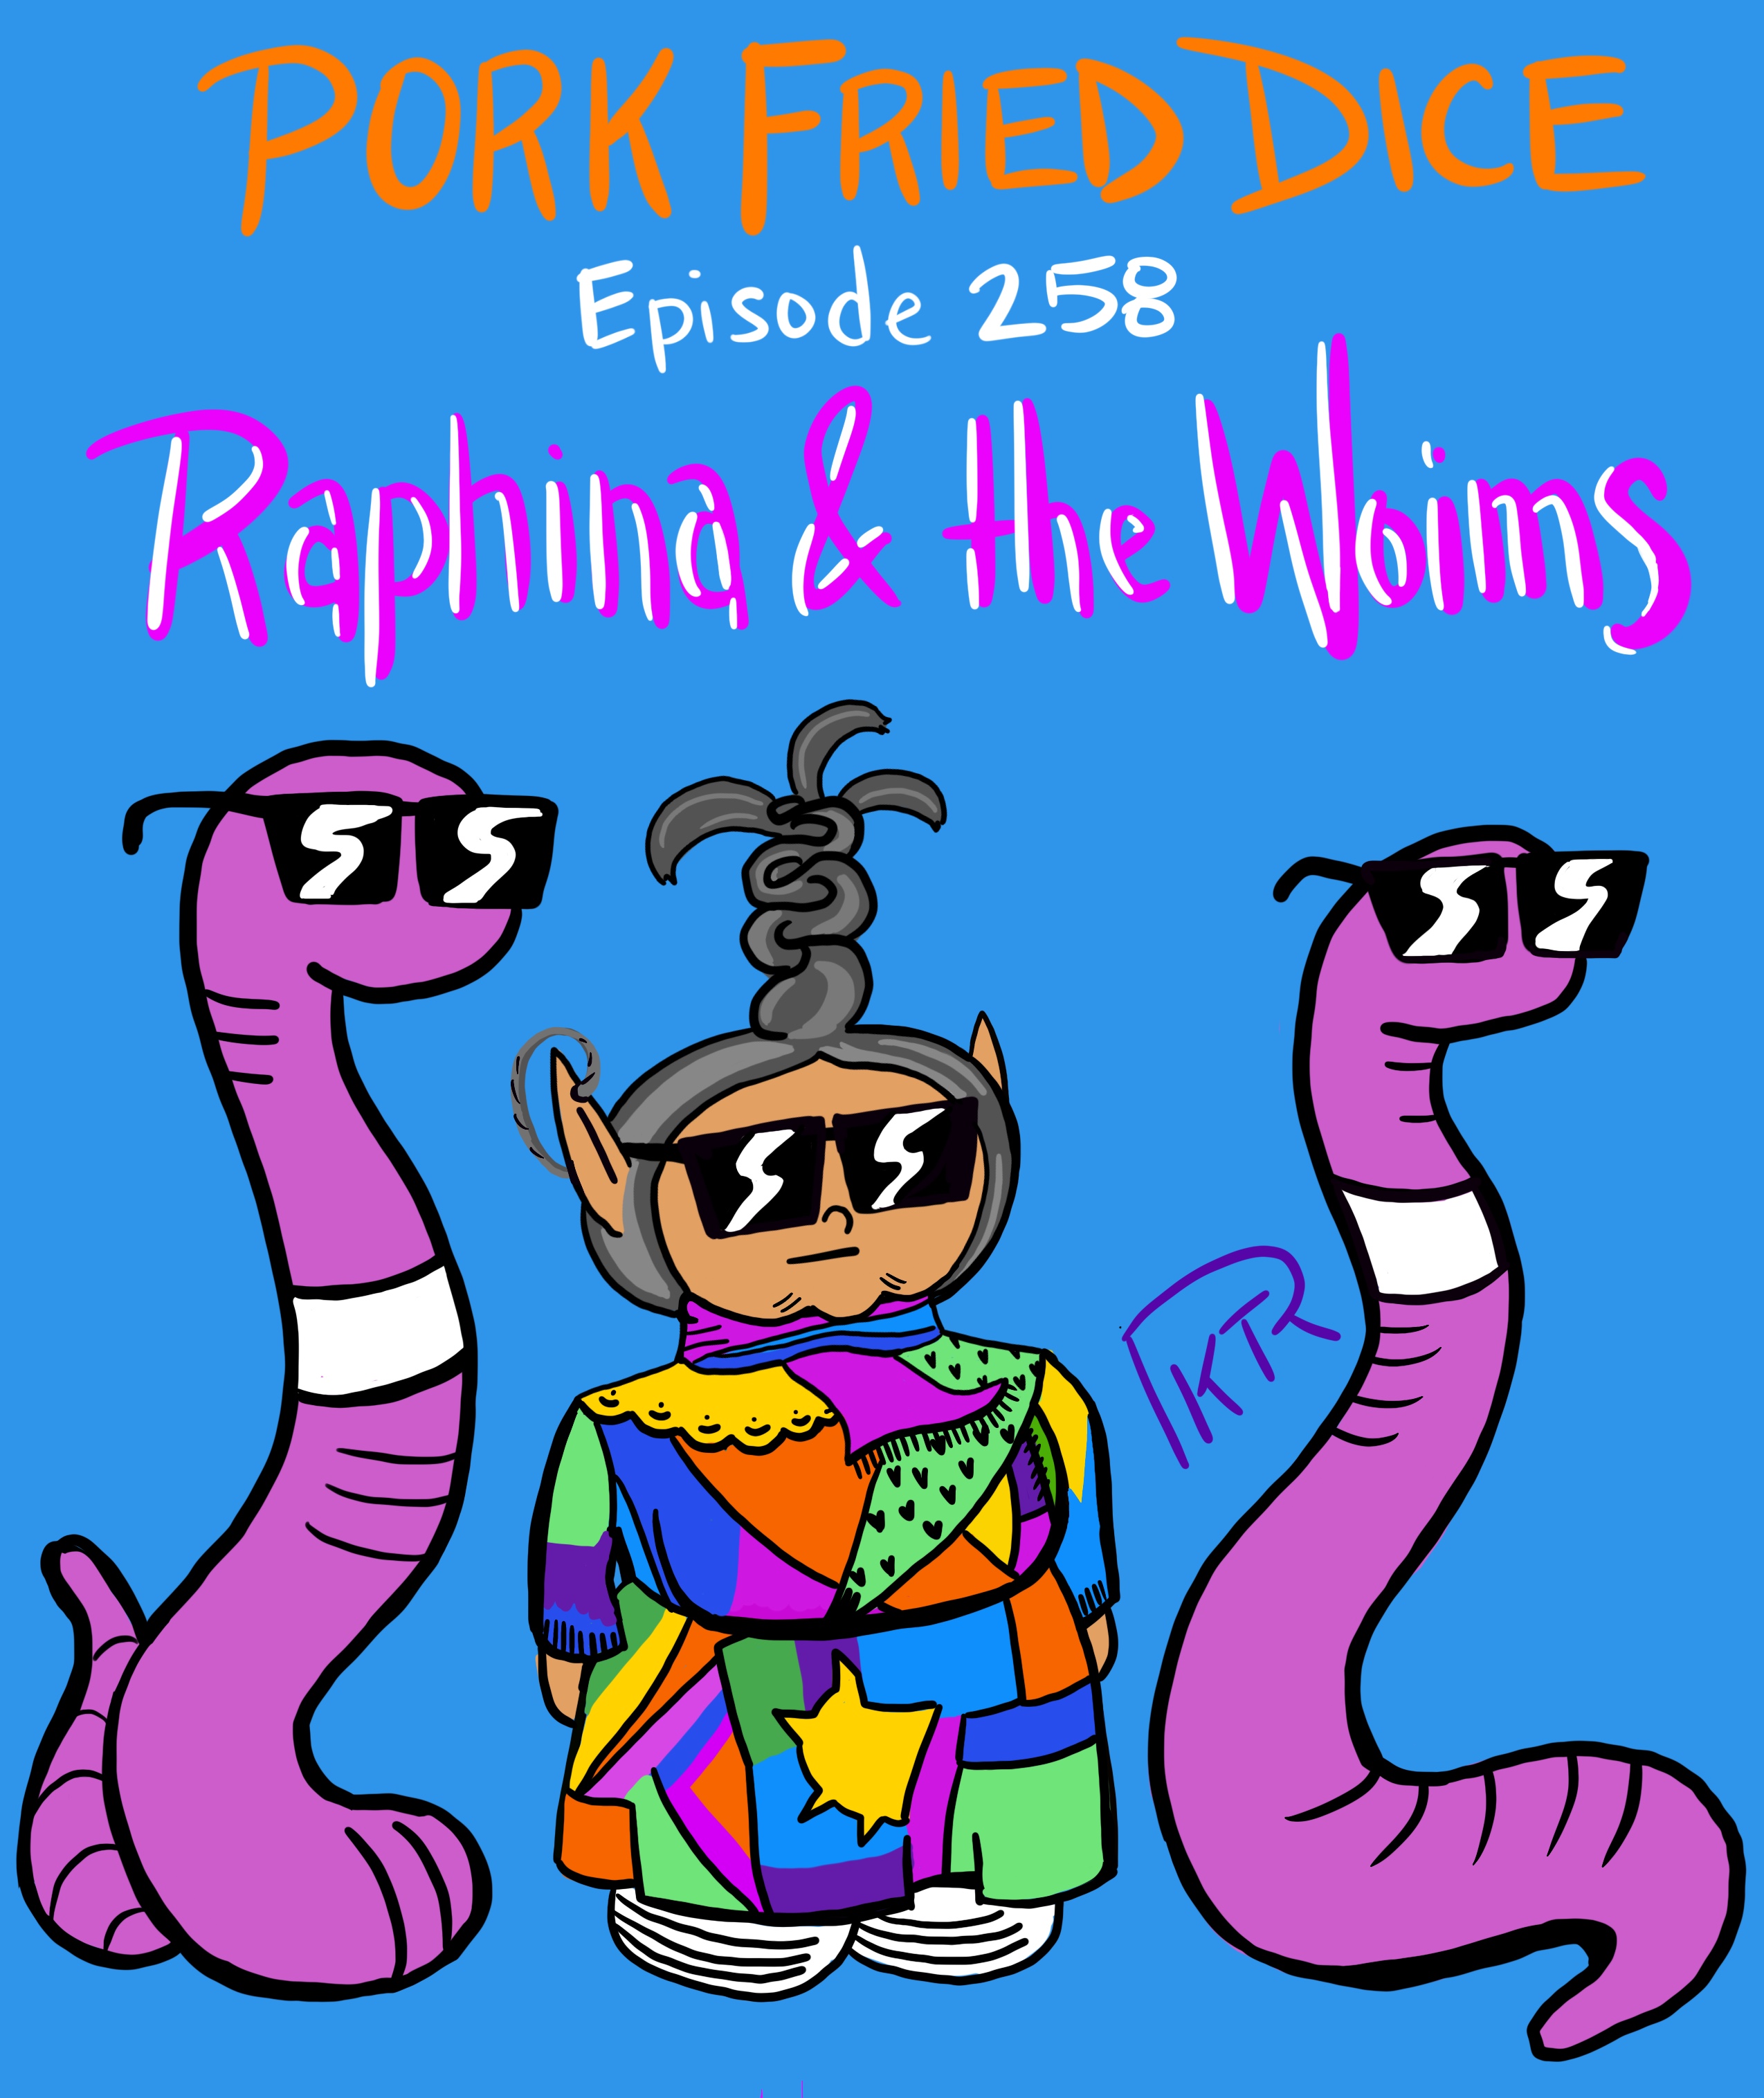 258: Raphina and the Woims